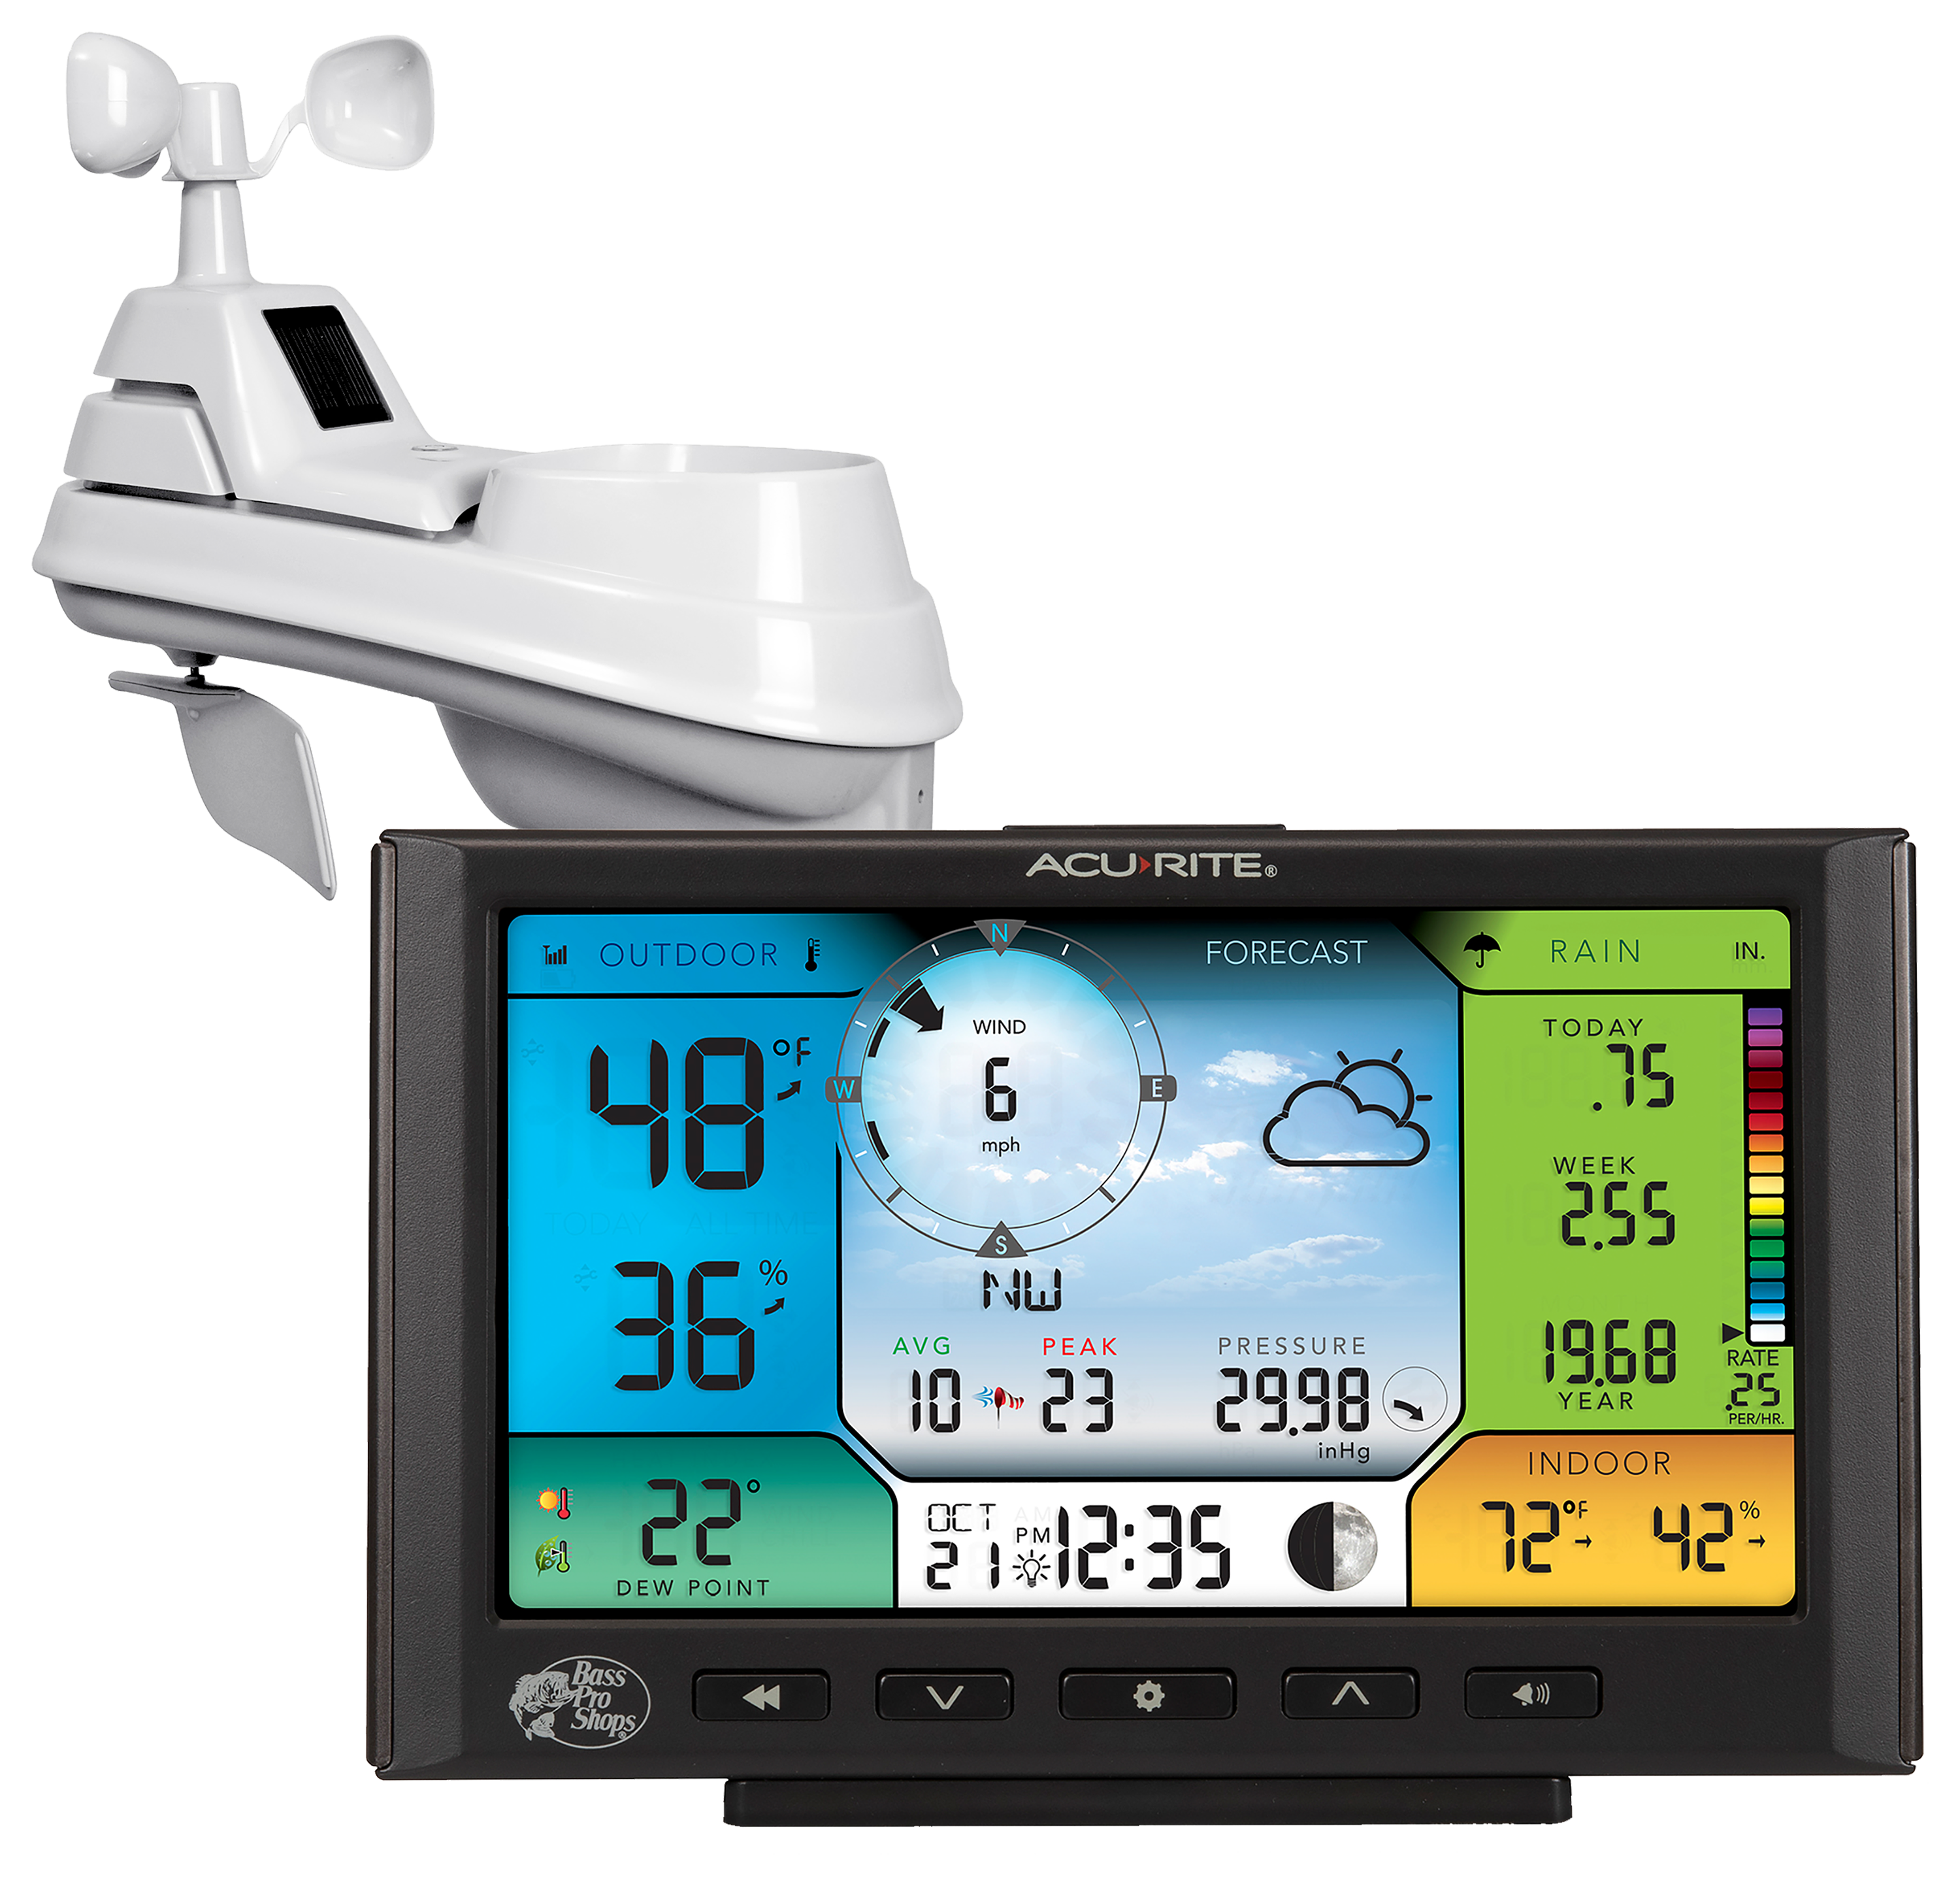 AcuRite Iris 5 in 1 Professional Weather Station with High Definition 